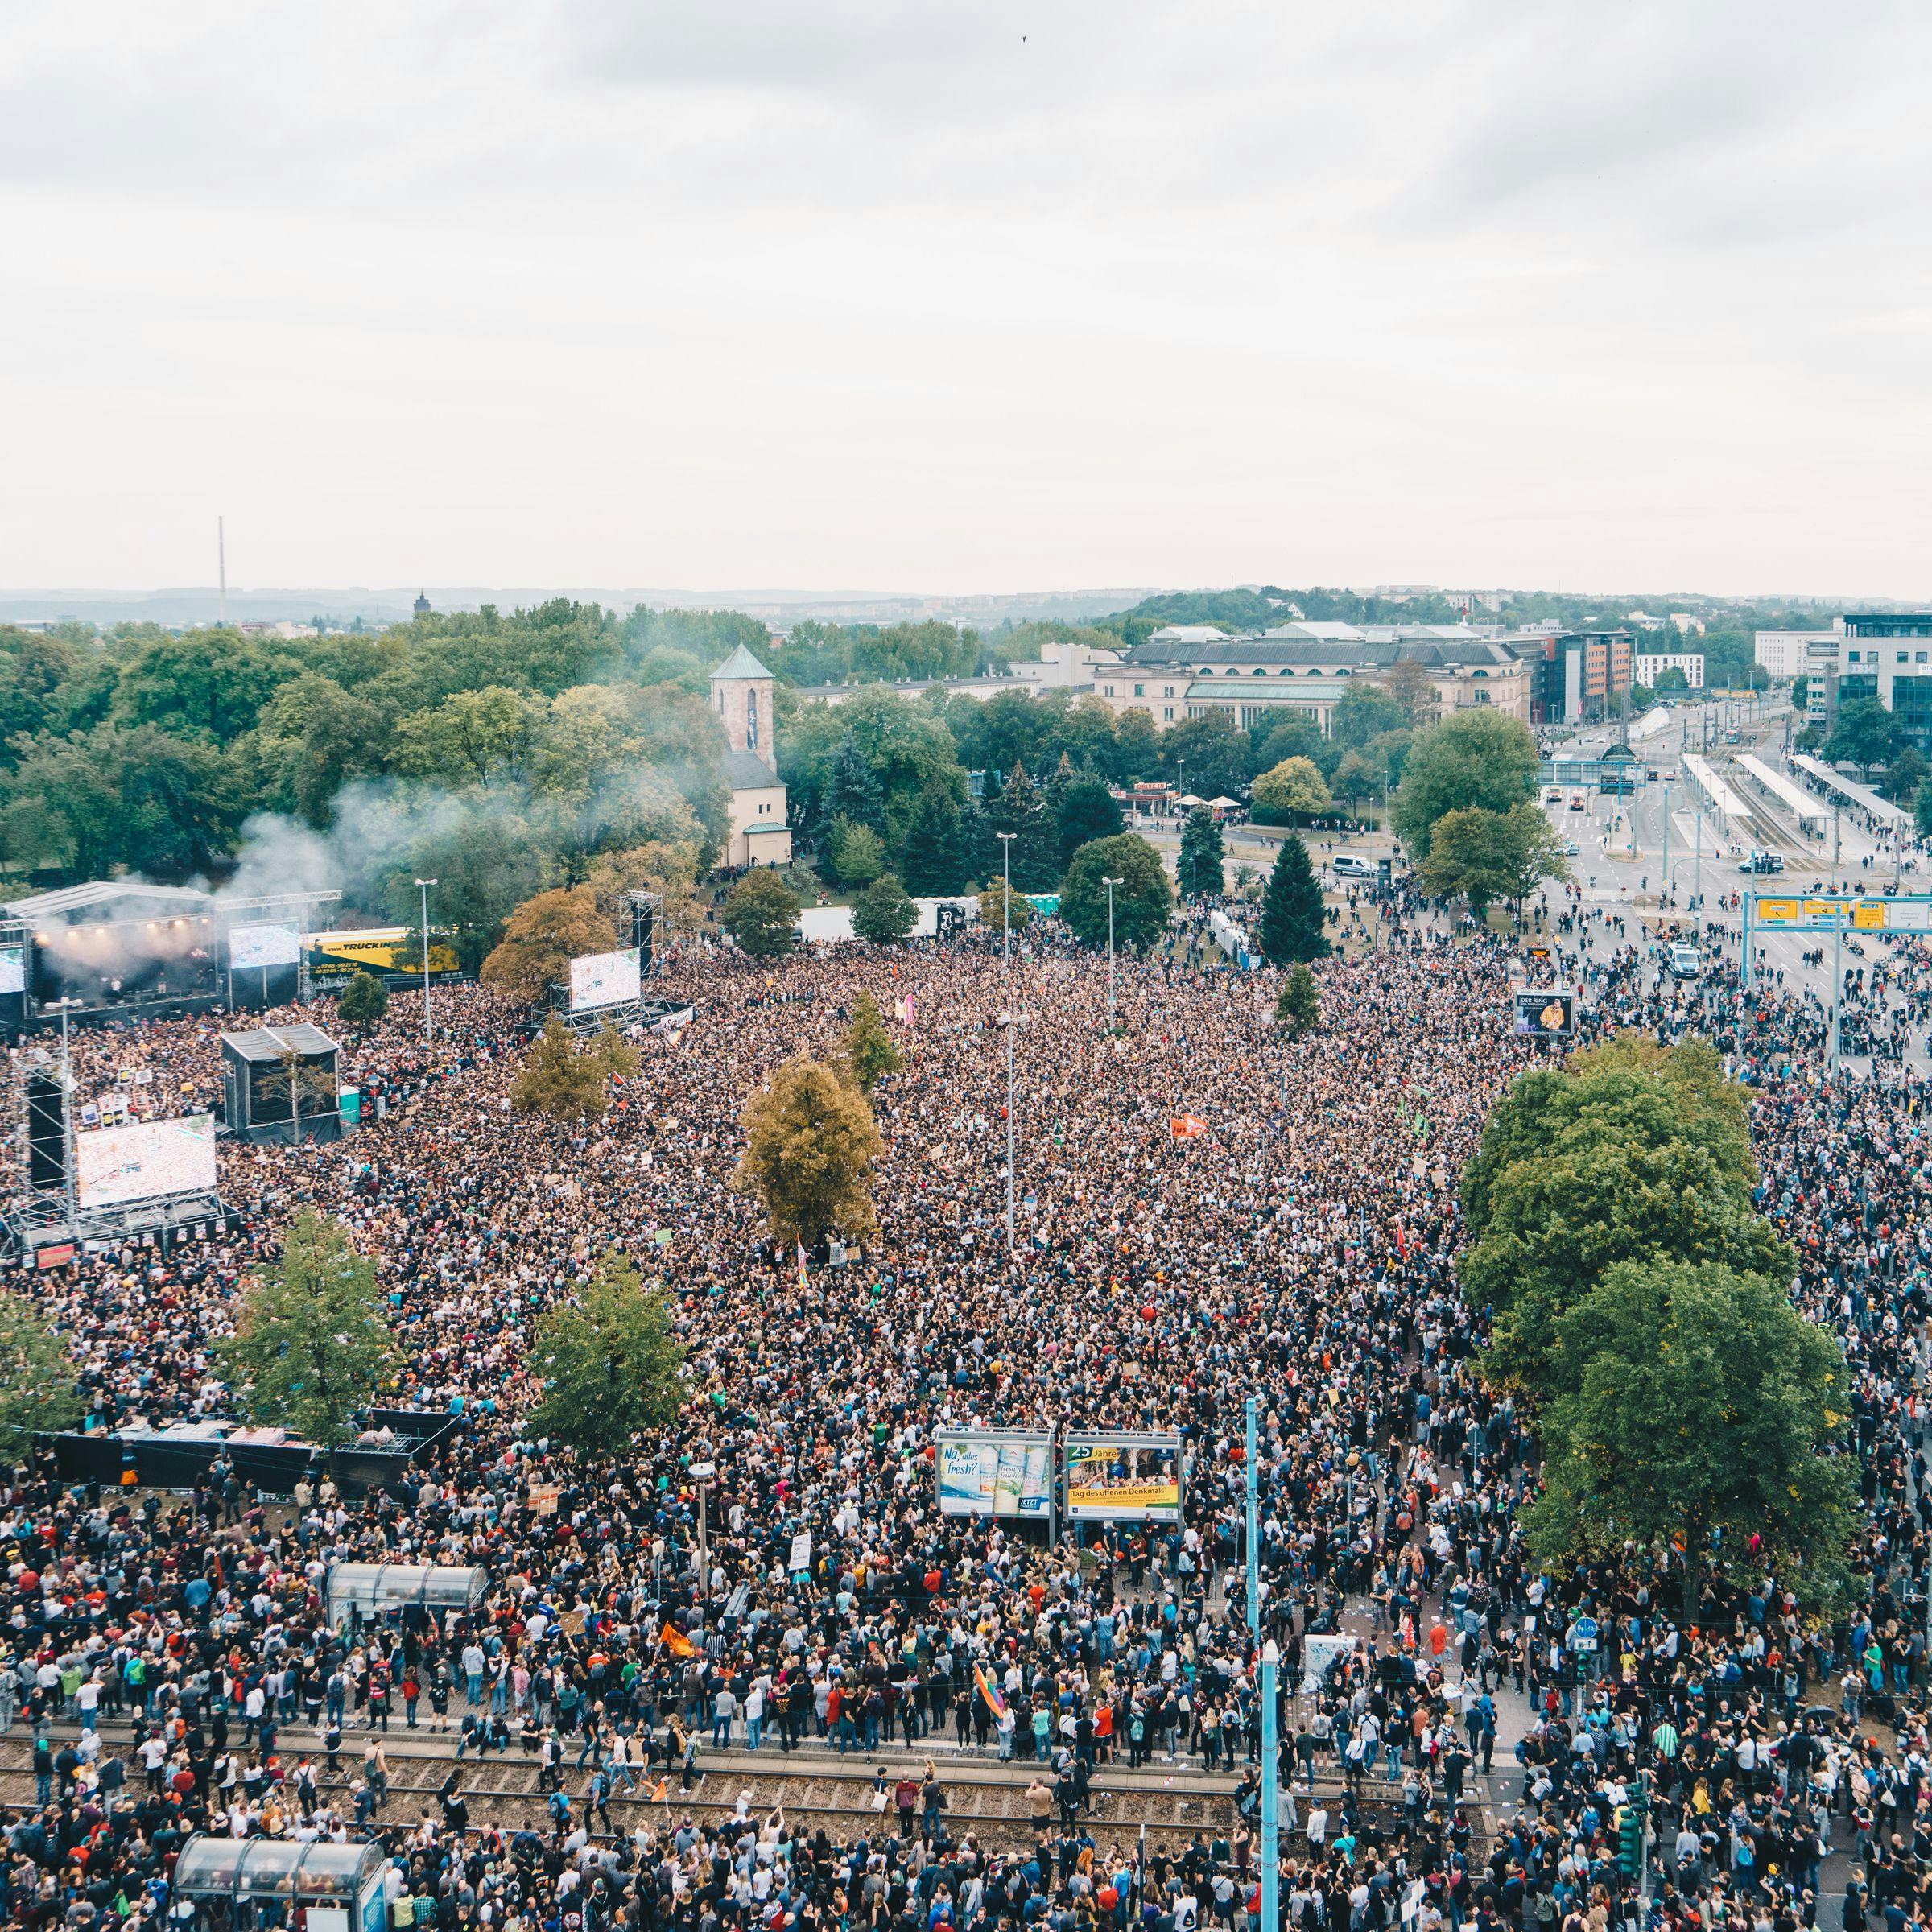 One can see a photo of COSMOS 2018, above which a crowd of people (photographed from above) completely fills the space in front of the stage. The streets adjacent are also filled with people.